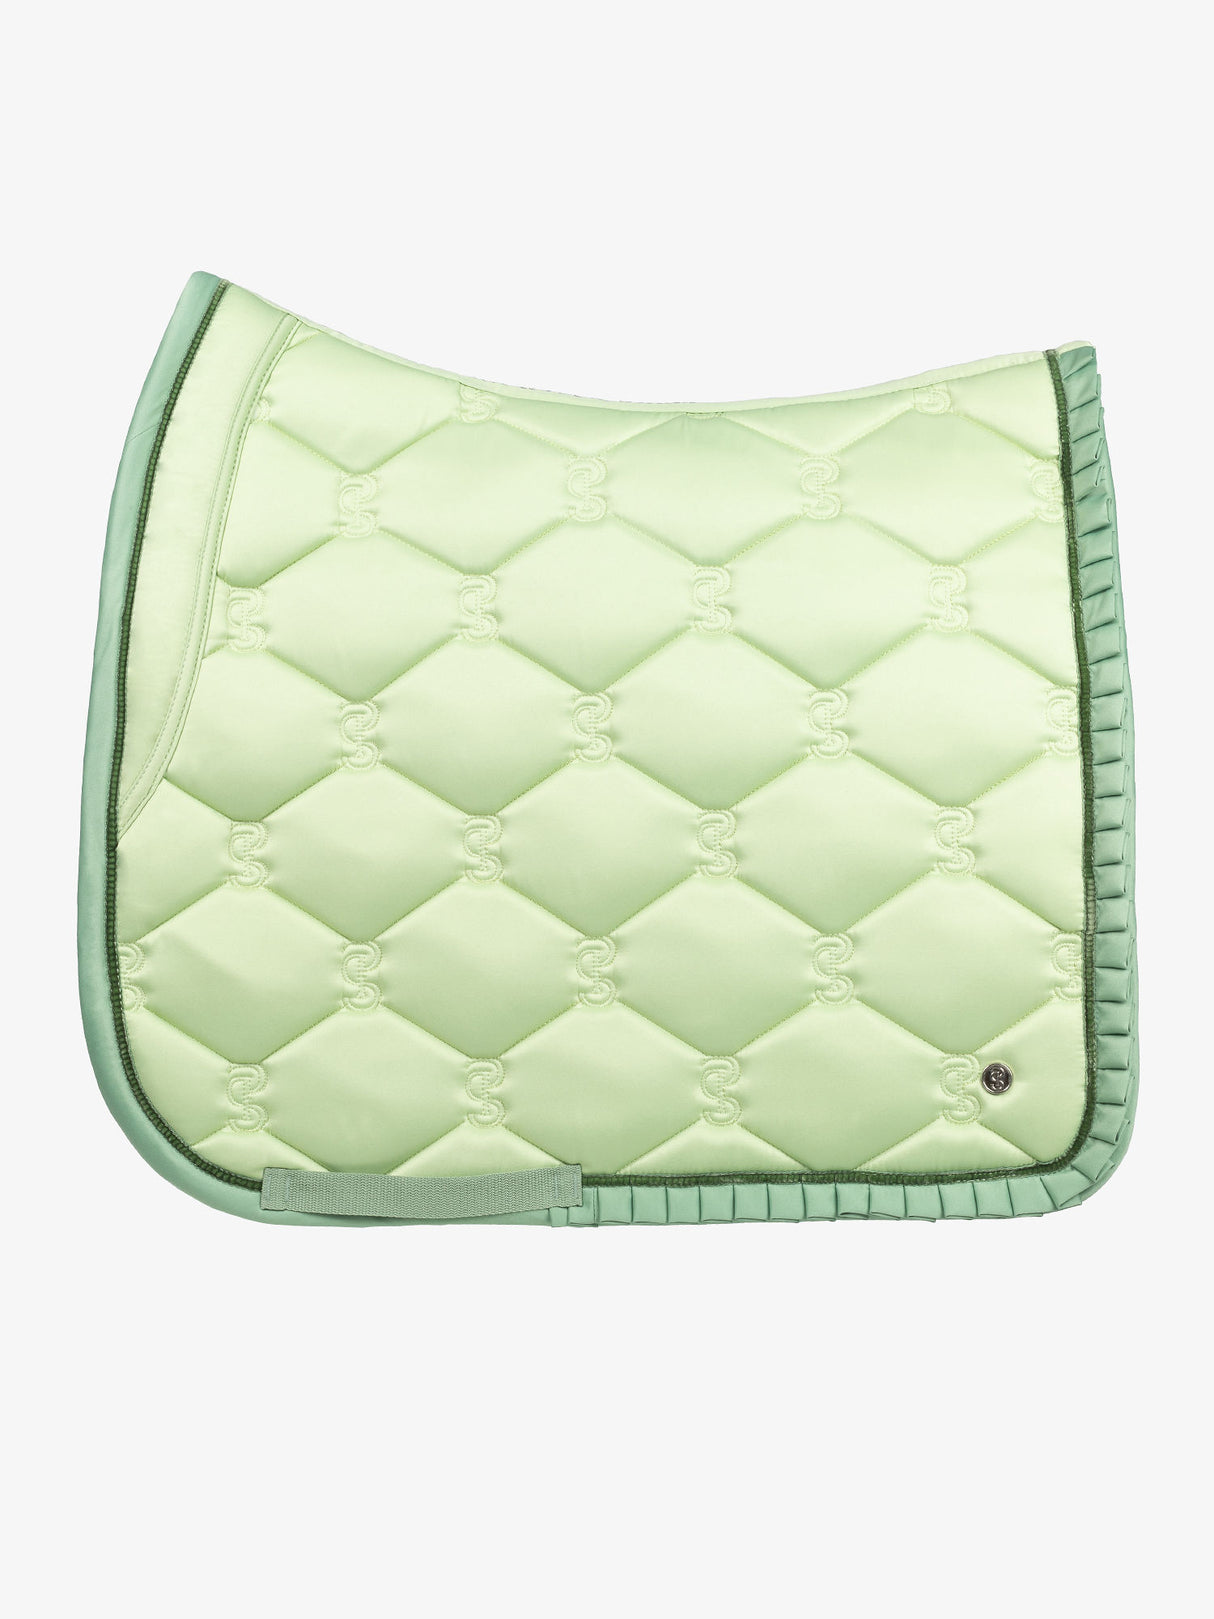 PS of Sweden Ruffle Dressage Saddle Pad Seed Green